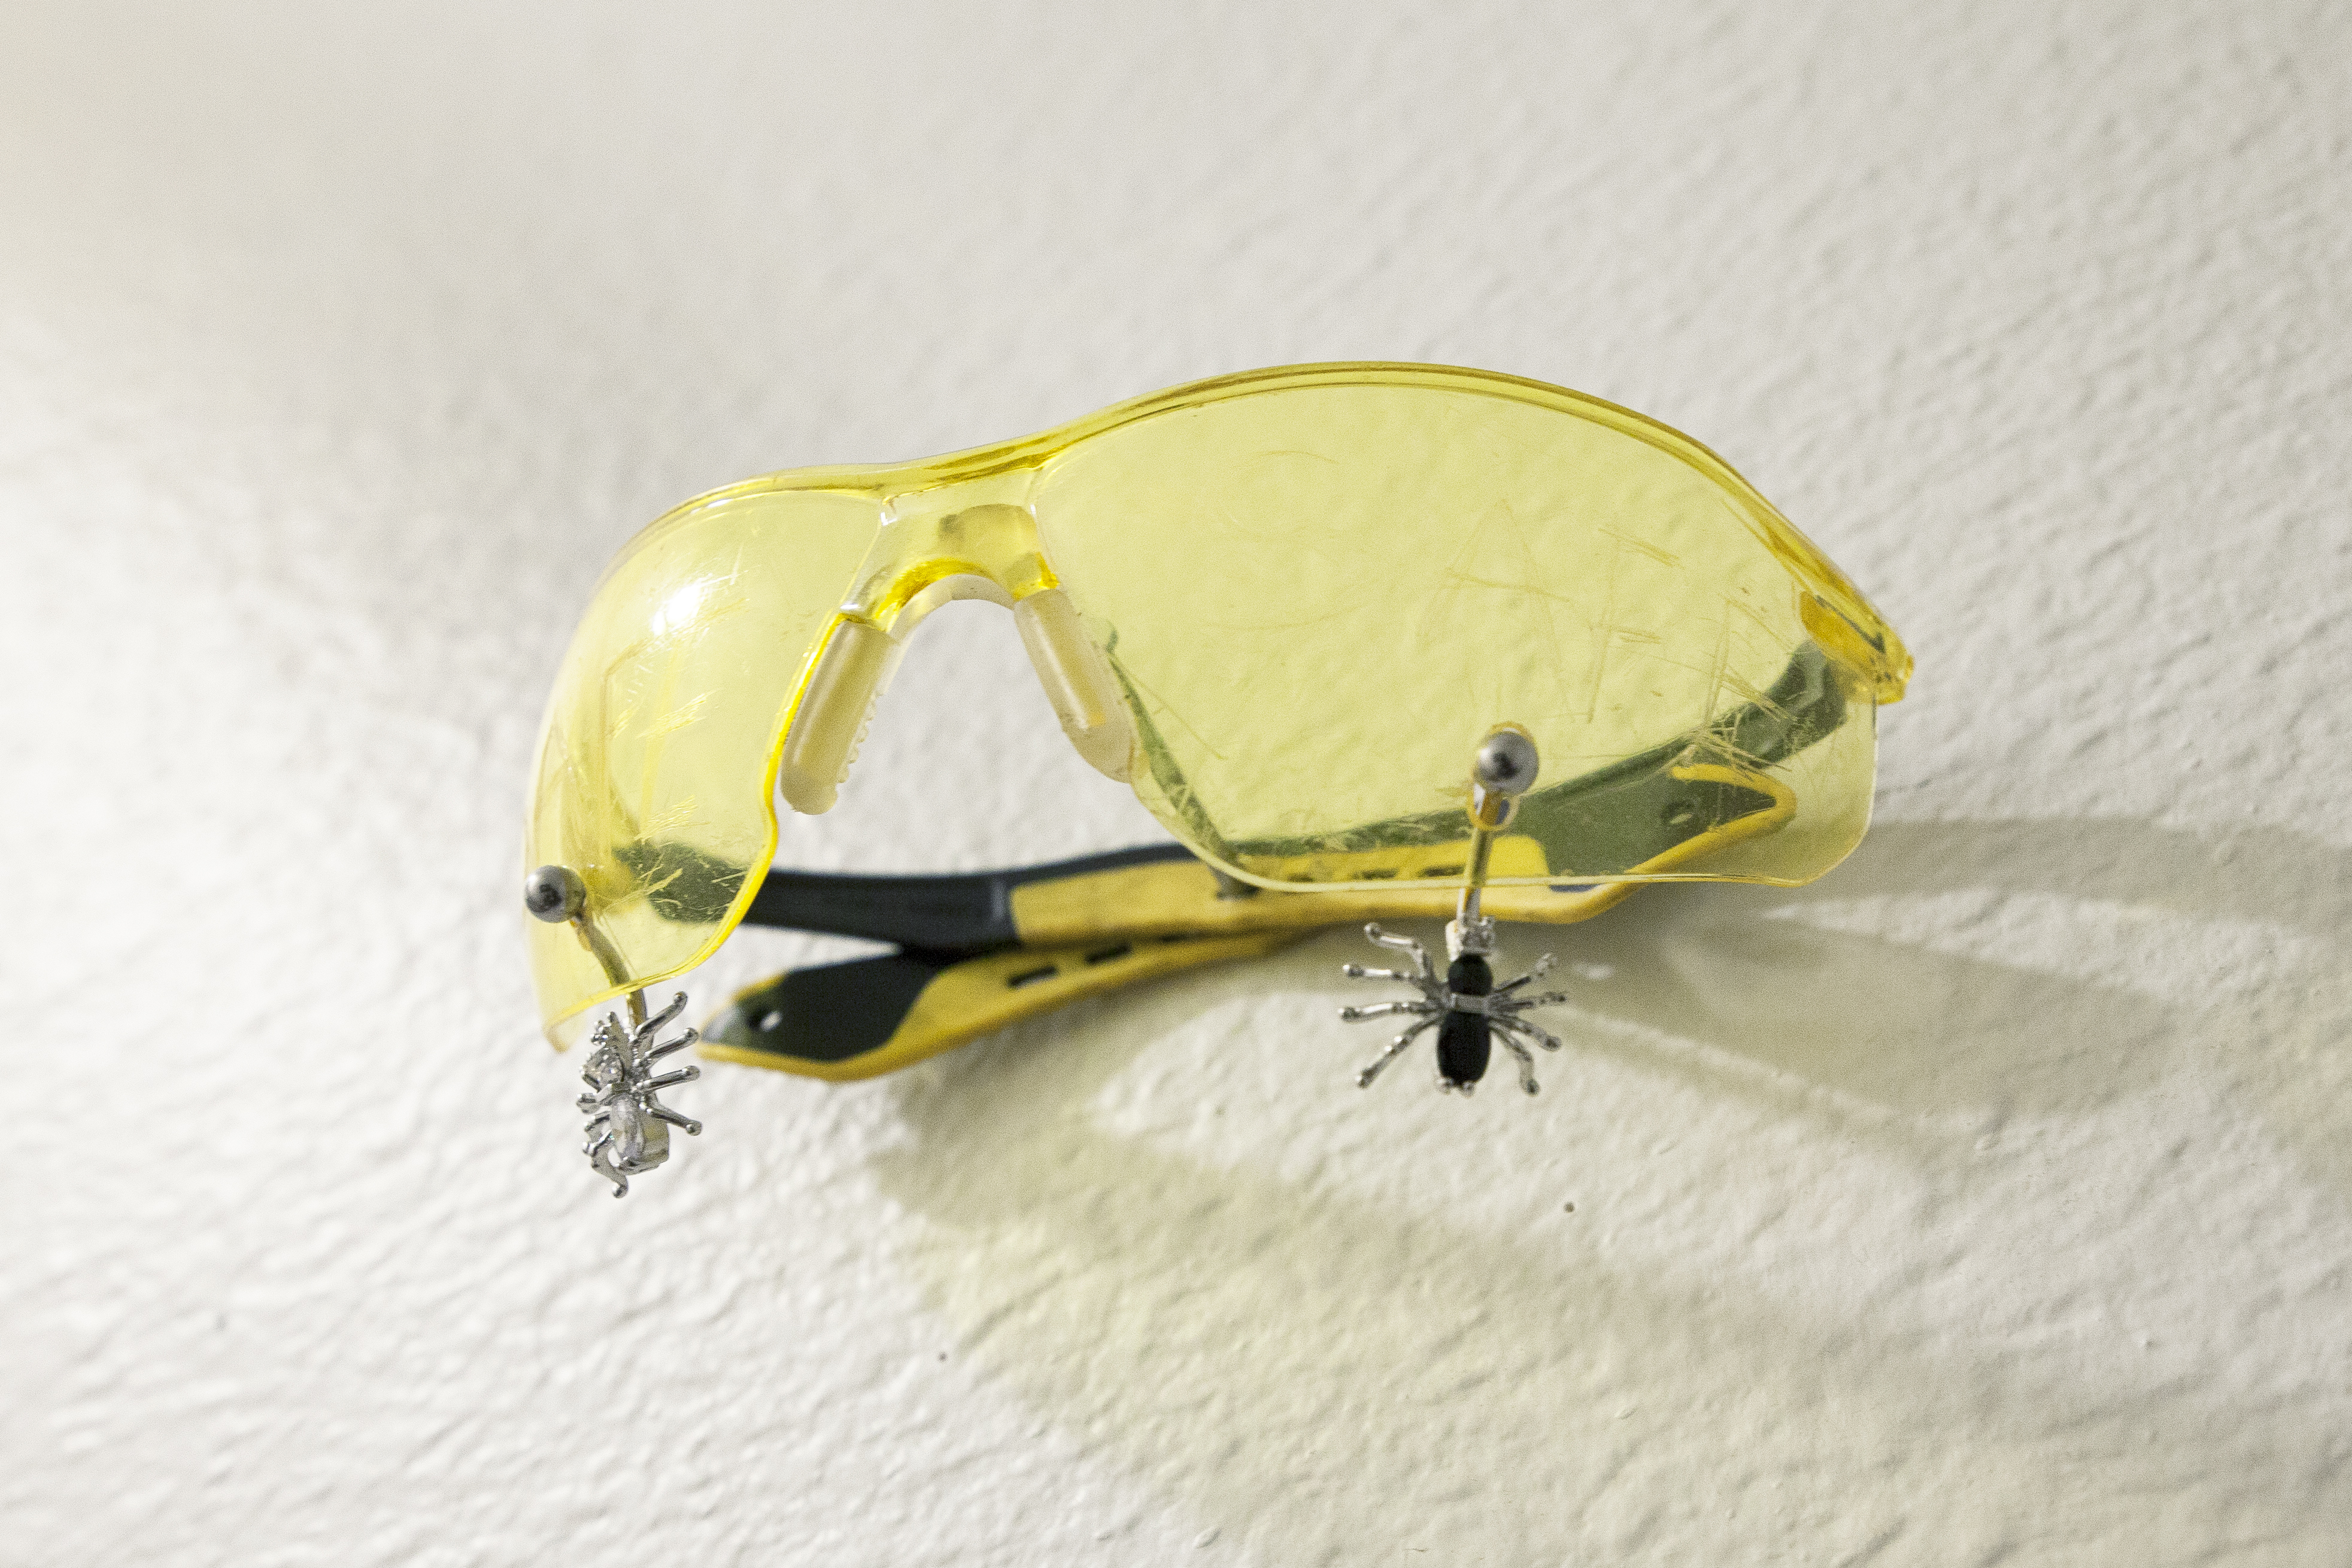 Yellow safety goggles with spider belly piercings through them hung on a white wall